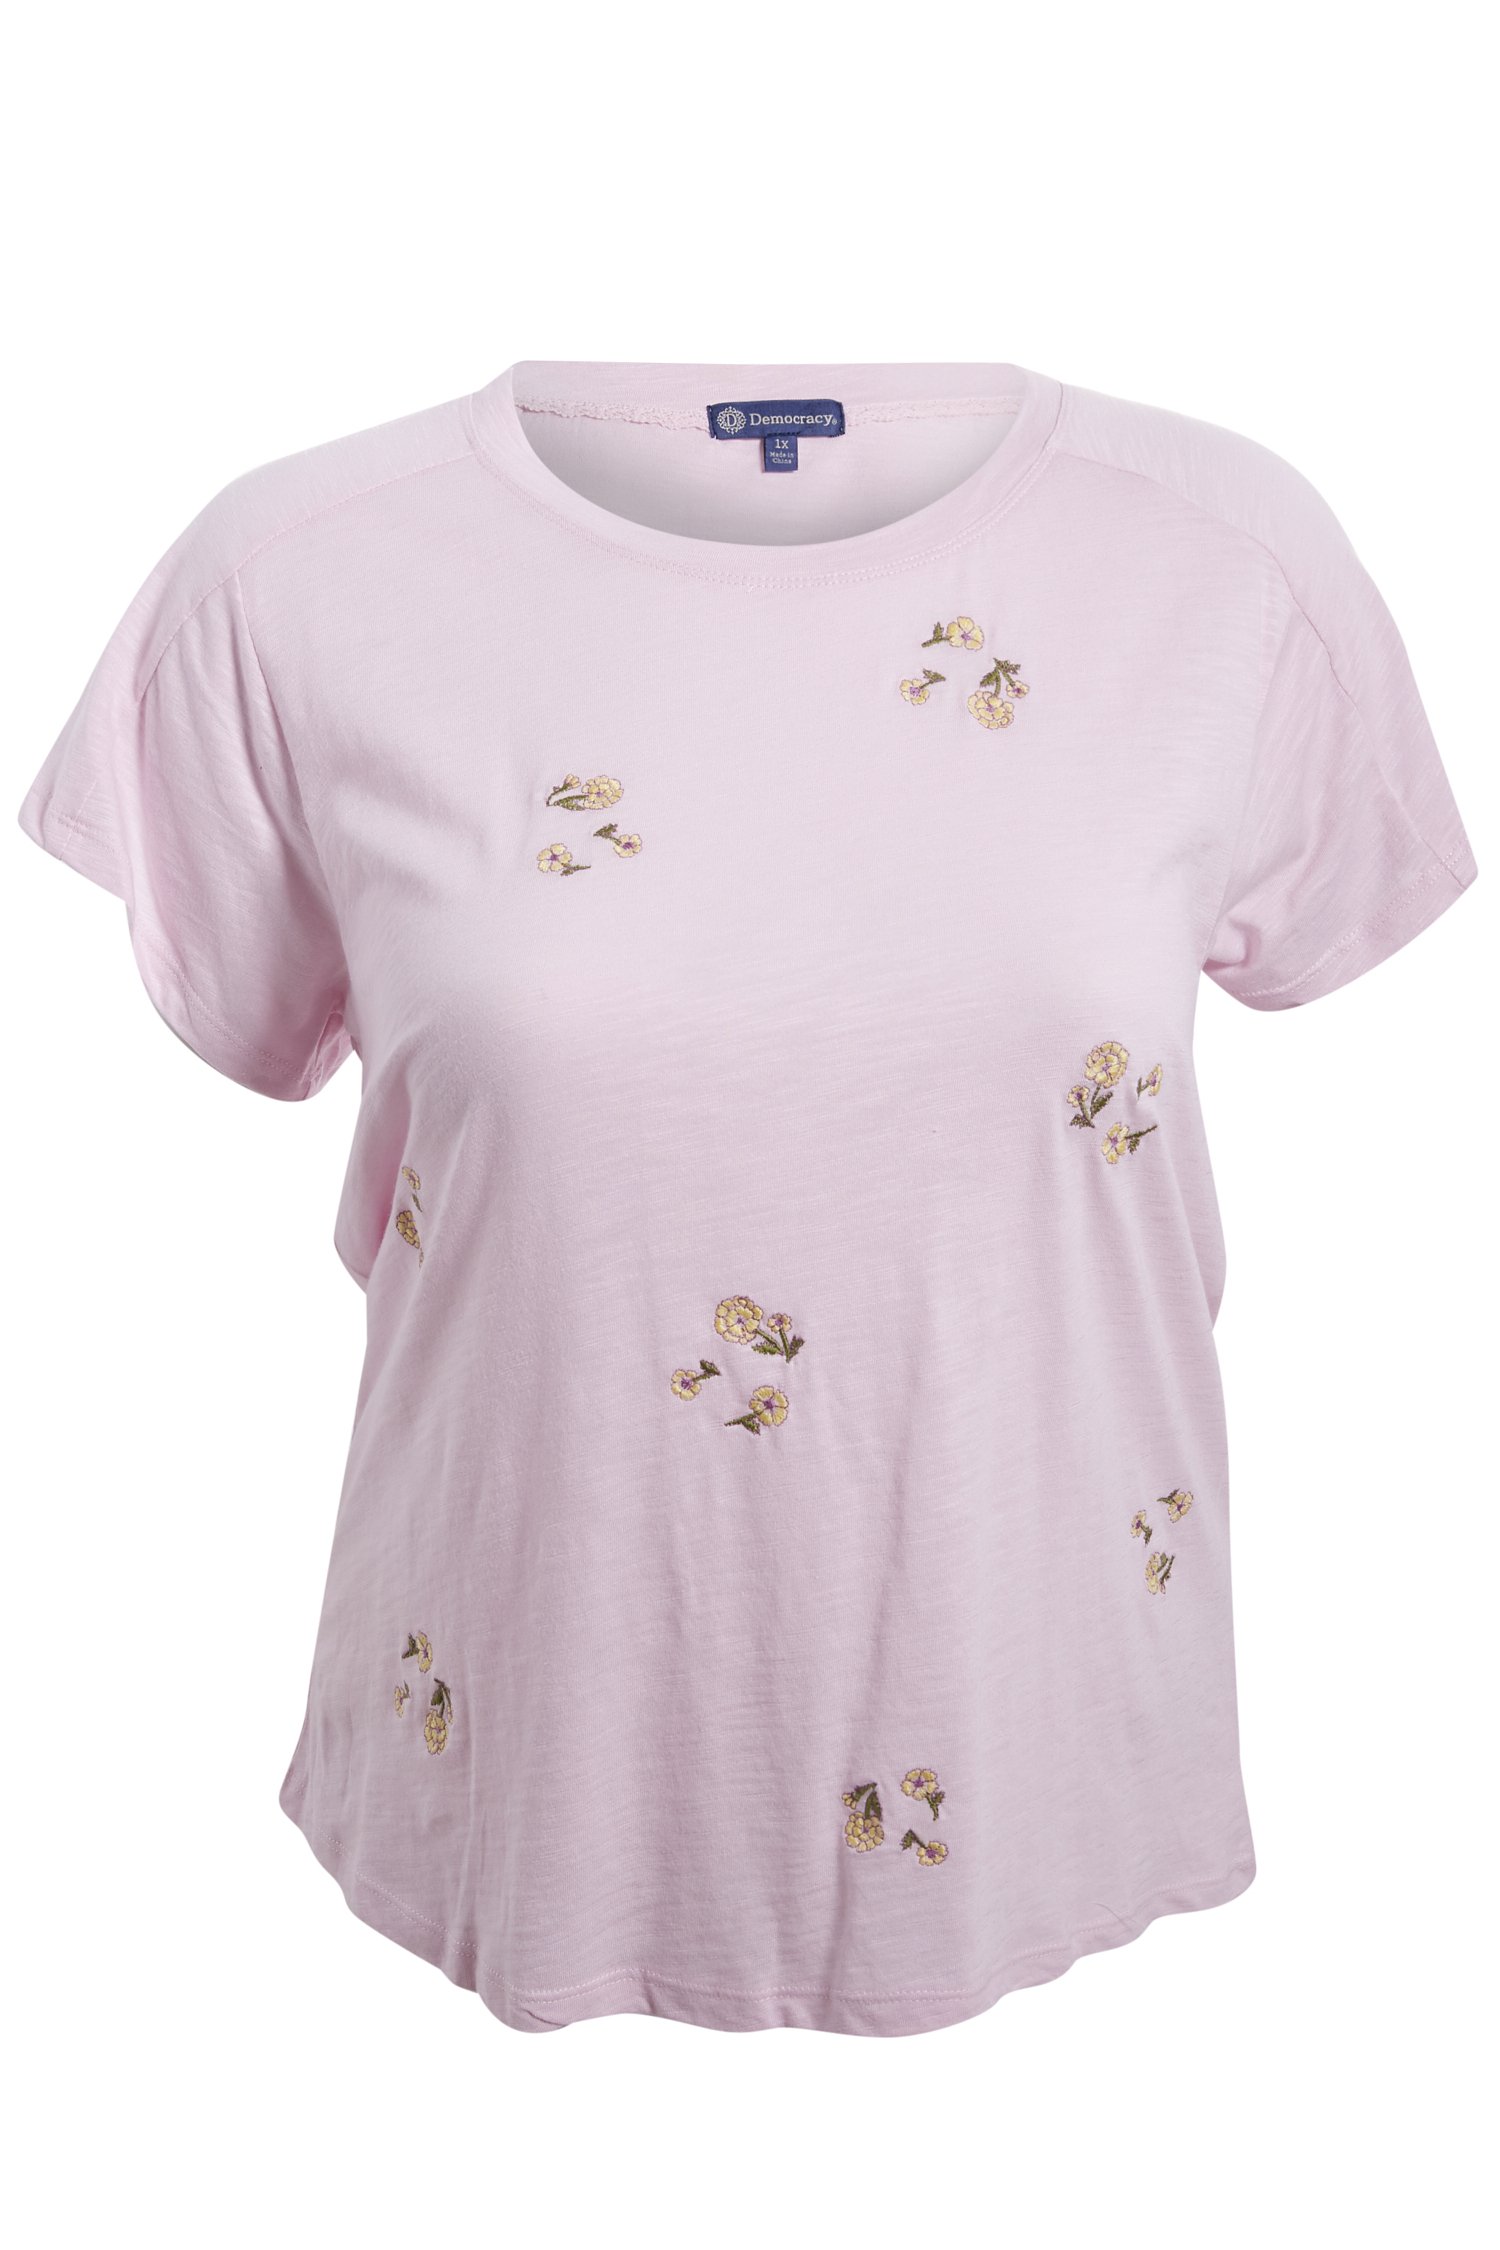 Democracy Floral Embroidered Top